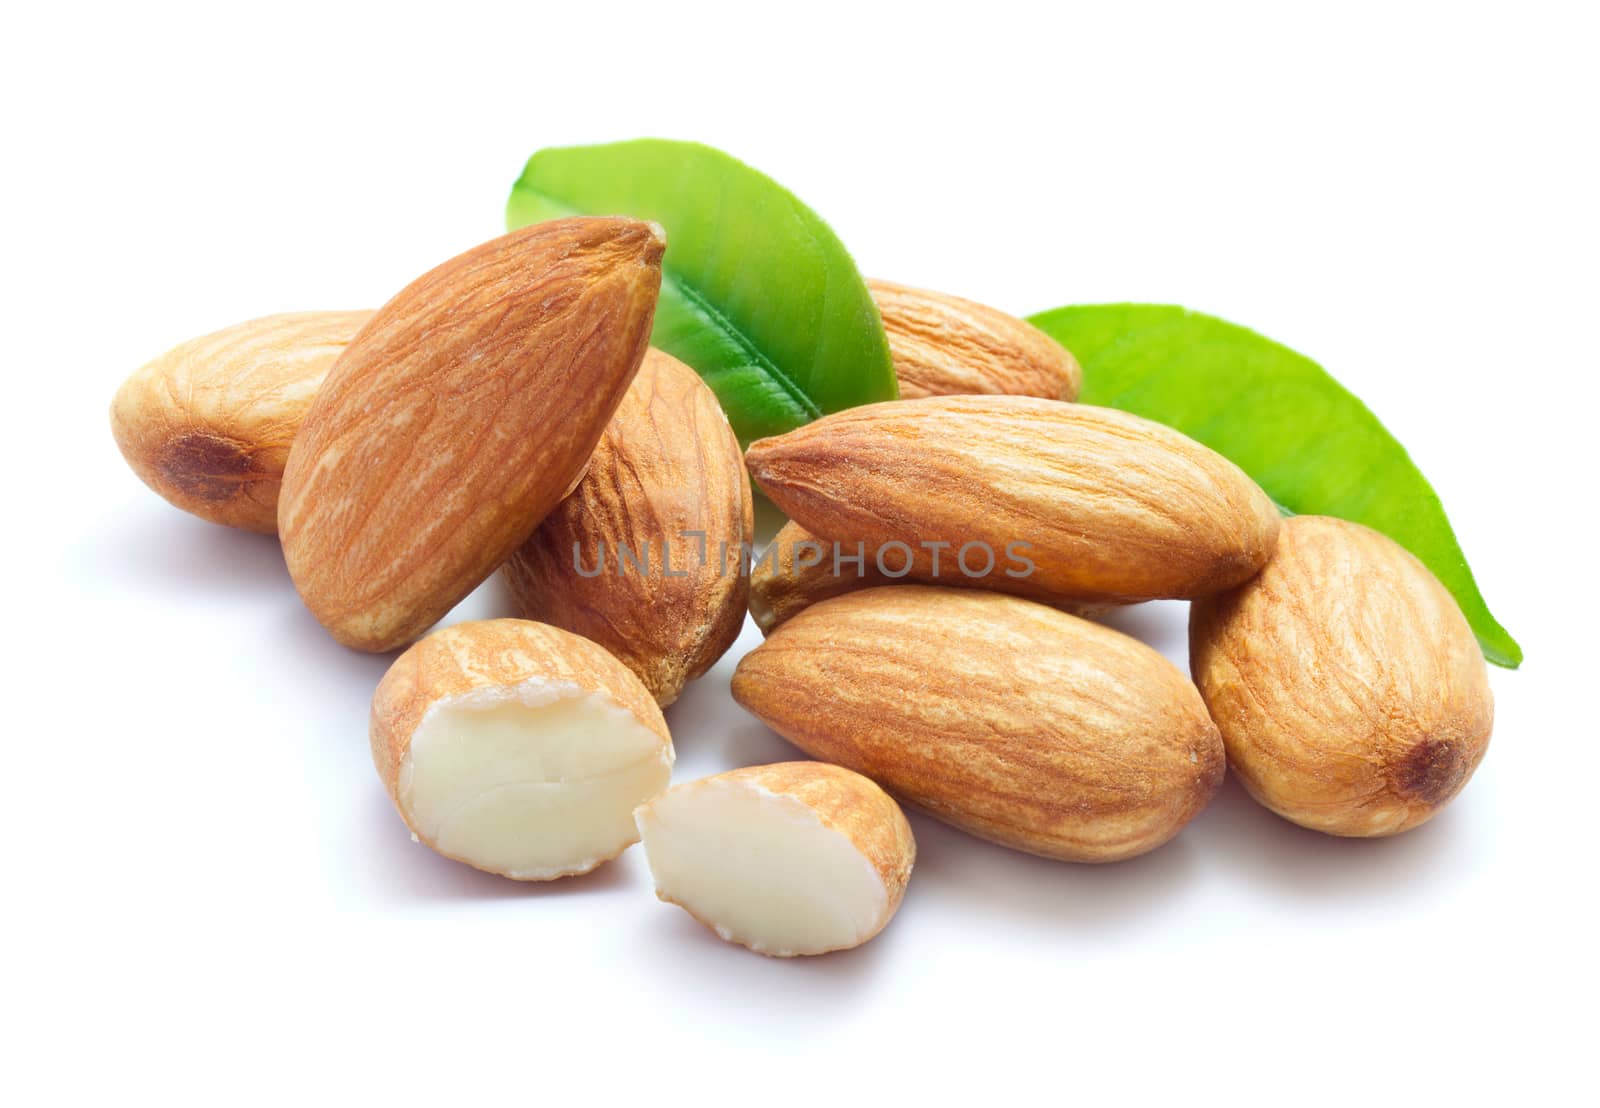 Almonds with leaves isolated on white